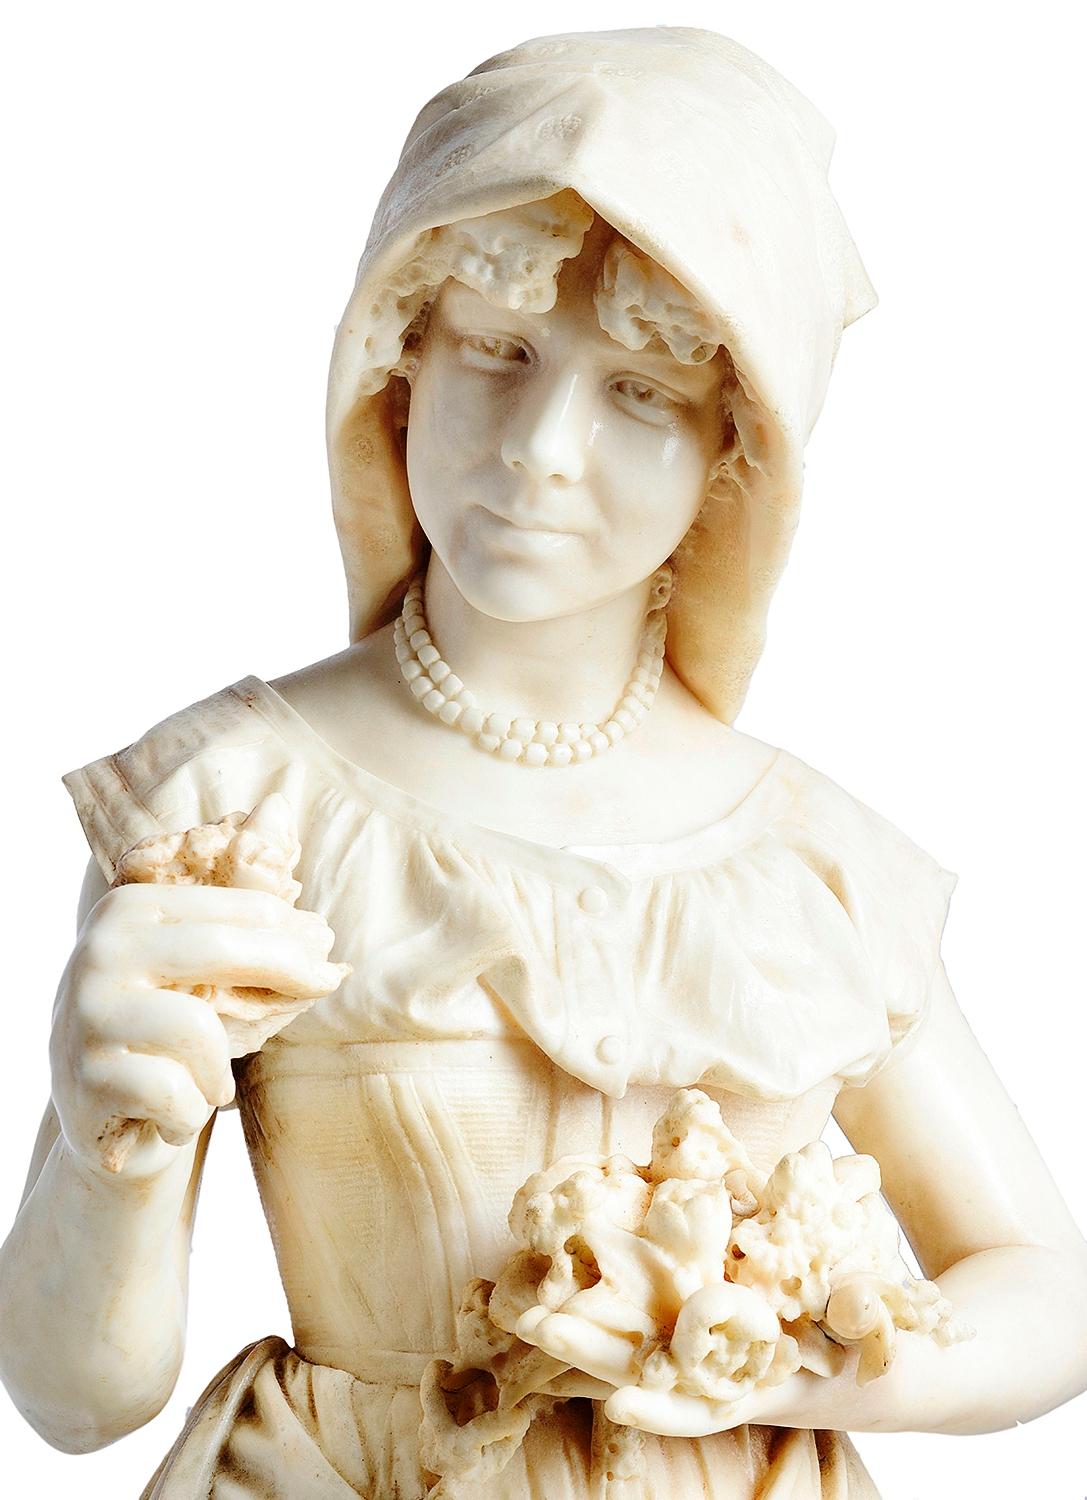 A beautifully carved Carrara marble statue of a flower girl.
Signed; Prof A. Cambi, Firenza 1893.